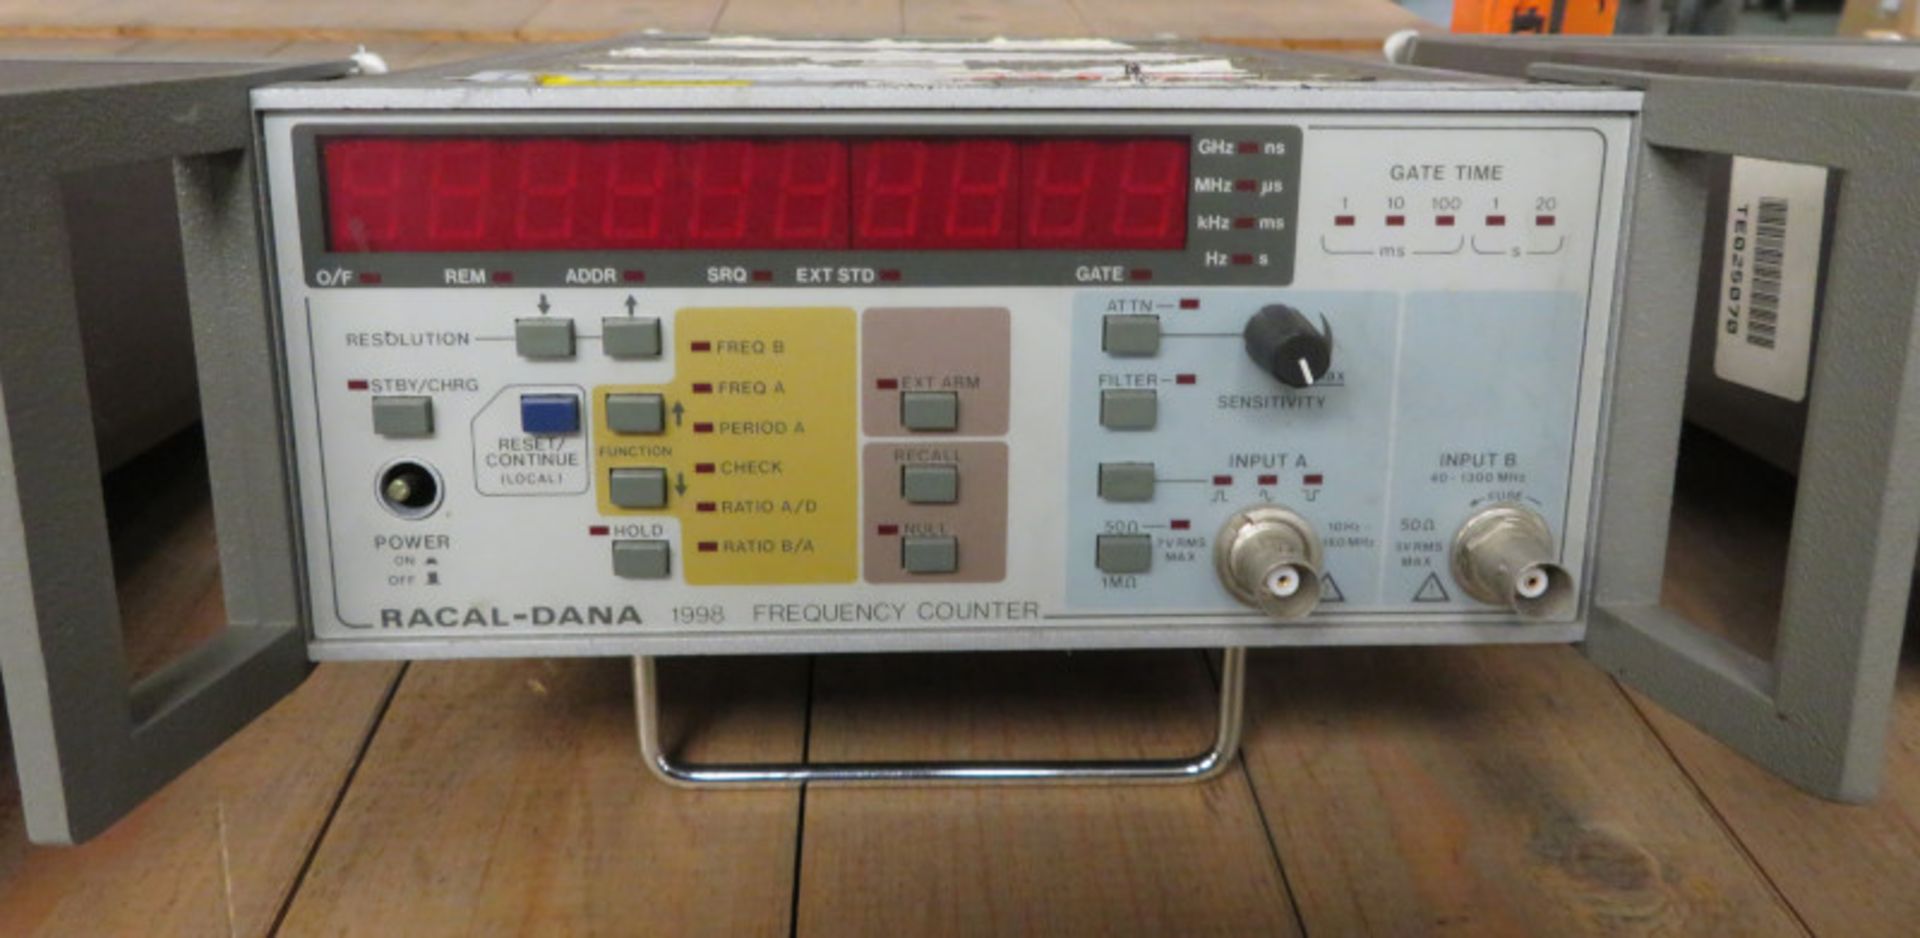 Racal-Dana 1998 Frequency Counter - Missing Power Button